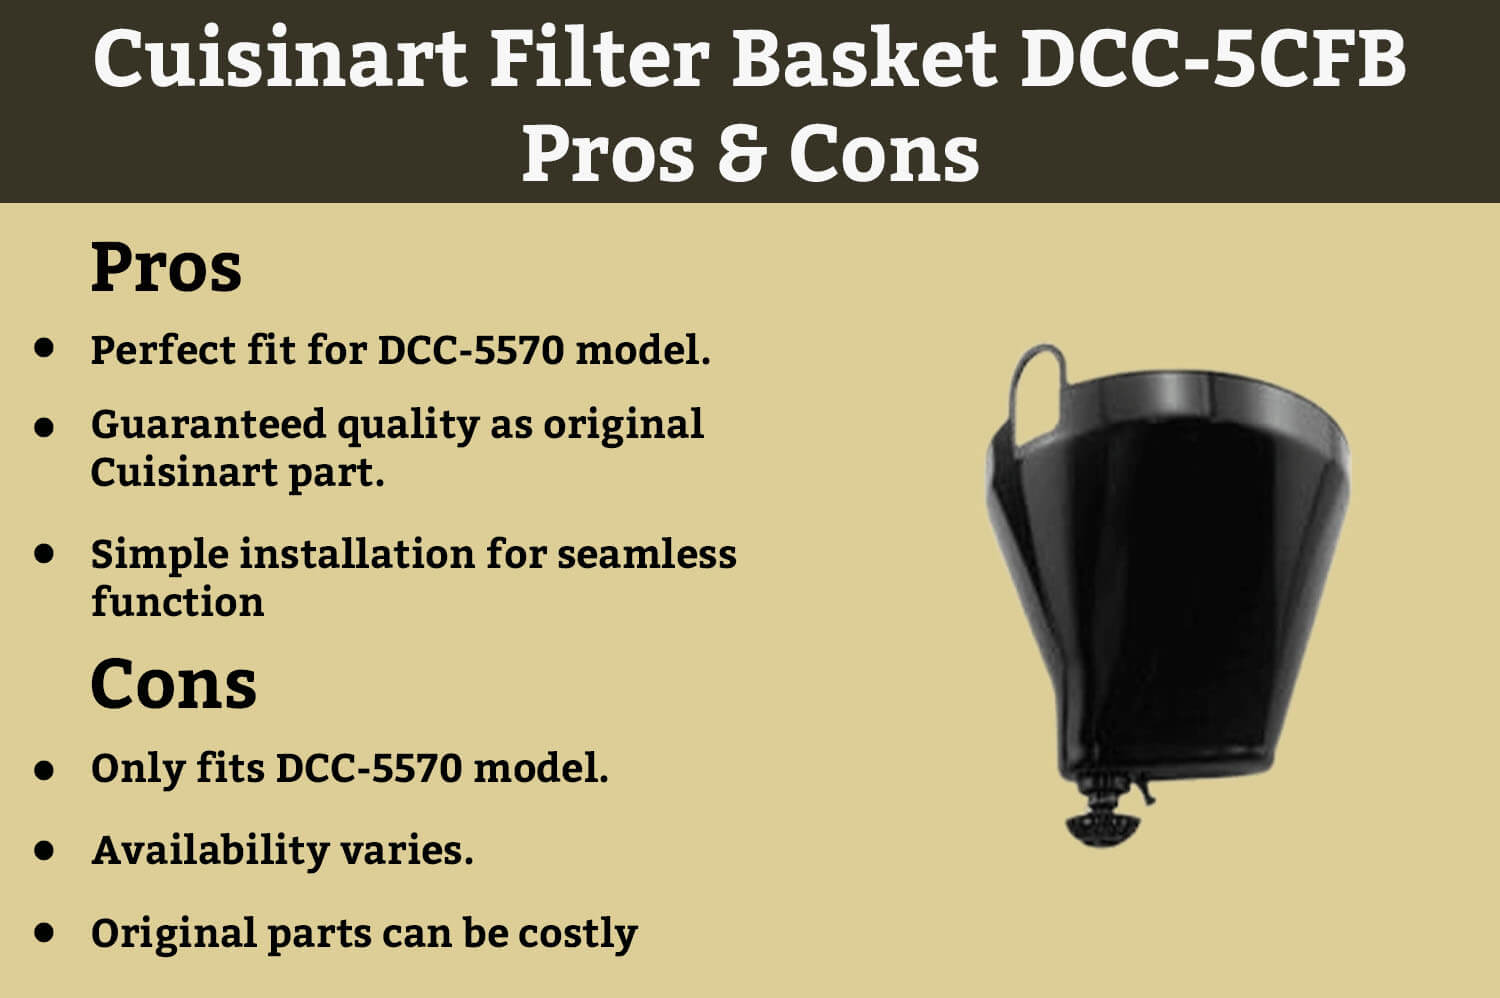 This image succinctly delineates the advantages and disadvantages of the "DCC-5CFB," providing a comprehensive overview within the context of our thorough Cuisinart Filter Basket review.